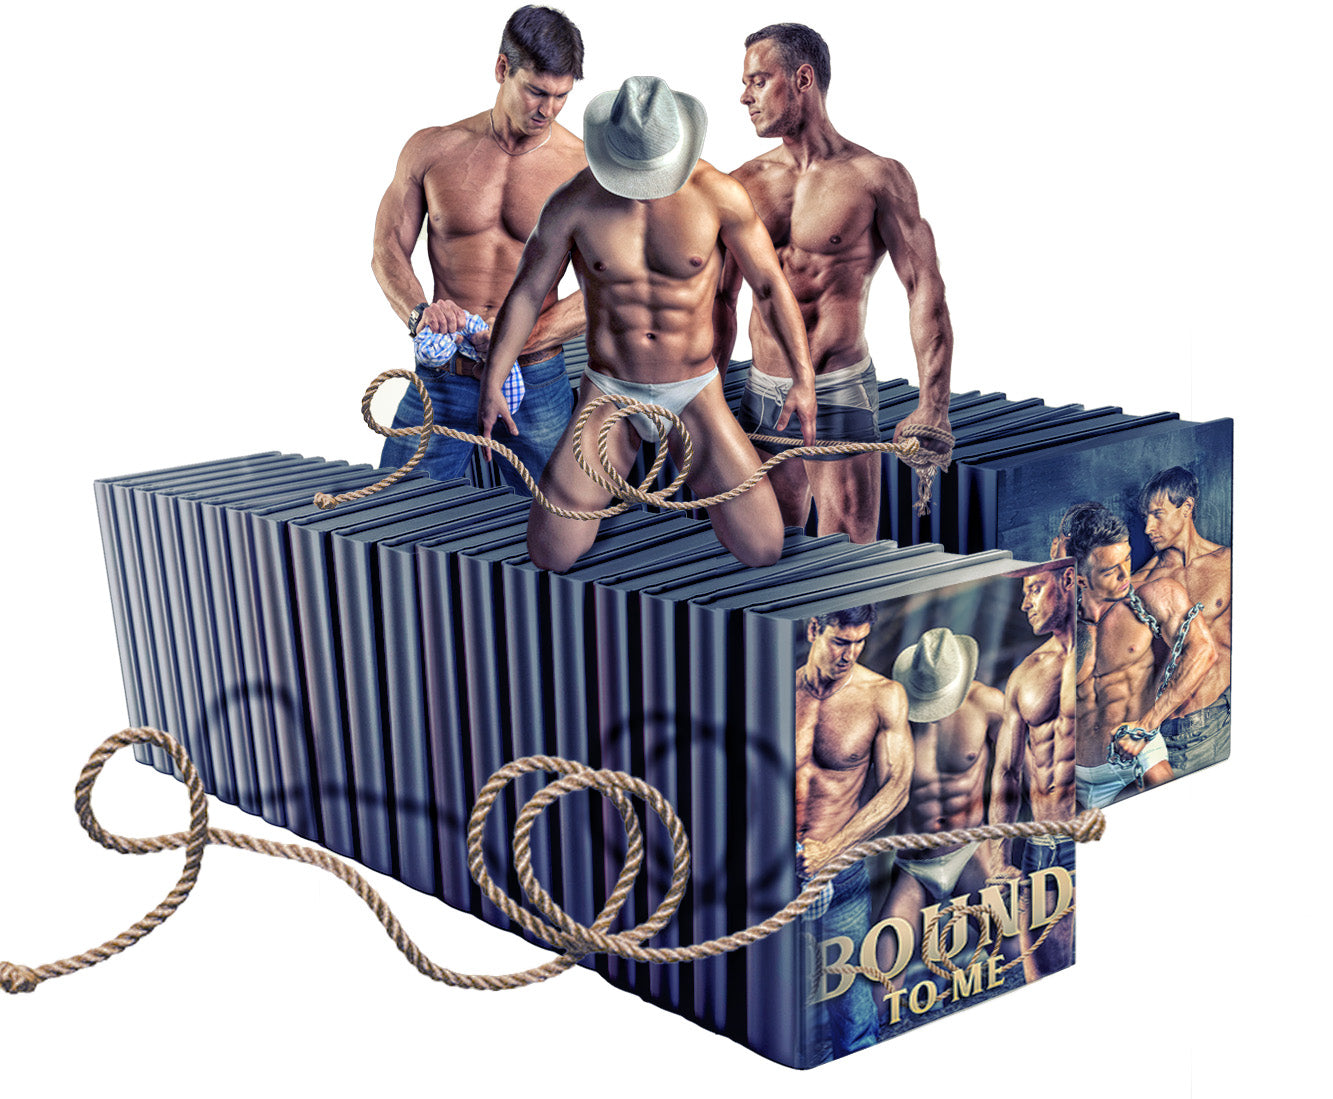 Bound To Me: The 35 Short Story Gay Romance Collection